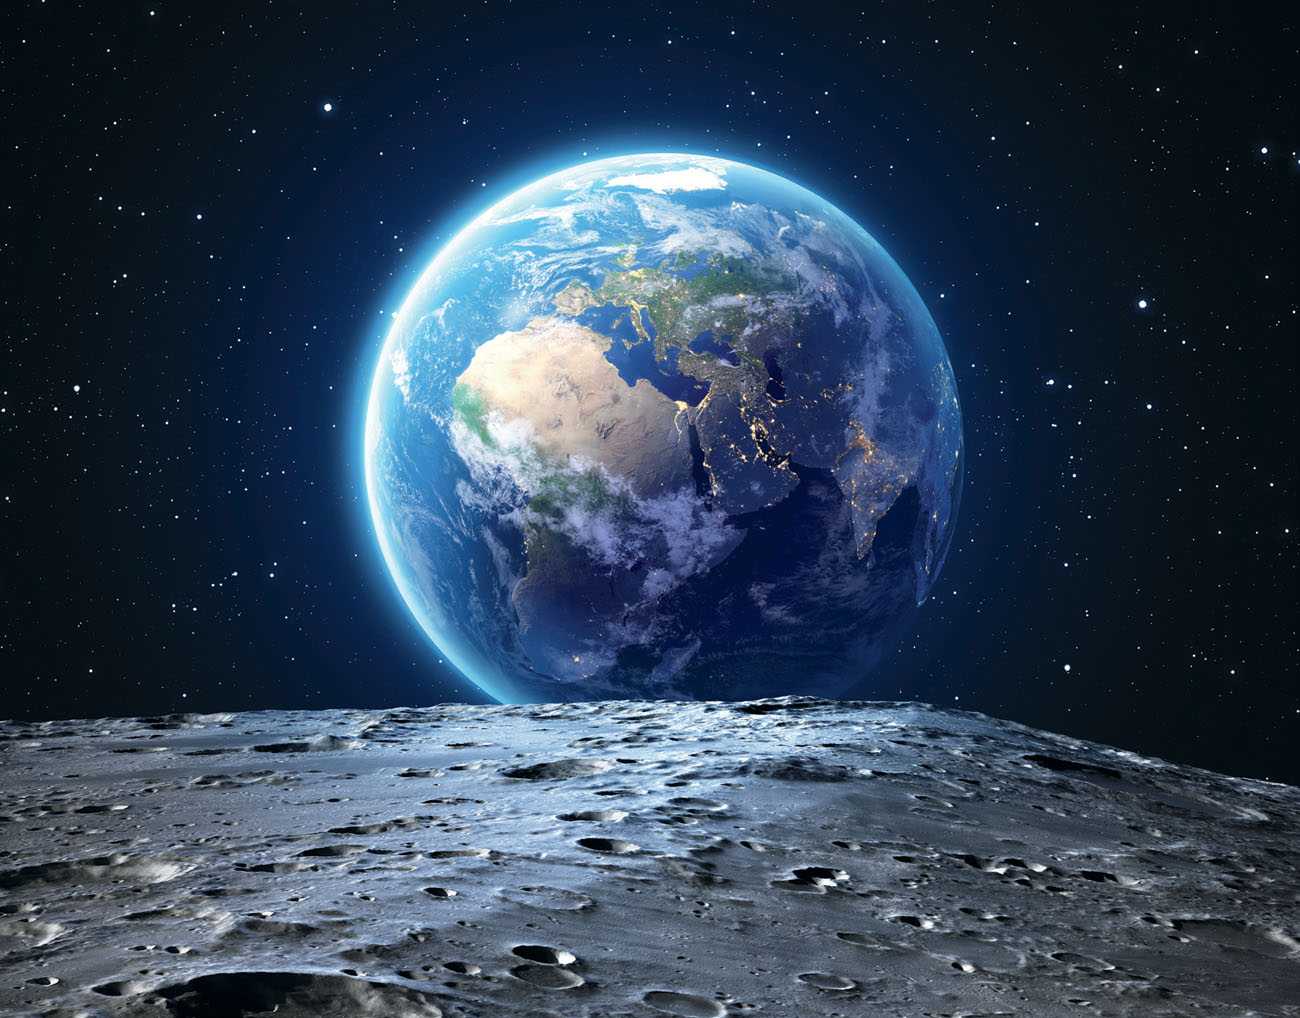 Imagine living on the moon and seeing Earth in the sky as you see the moon now - photo 3